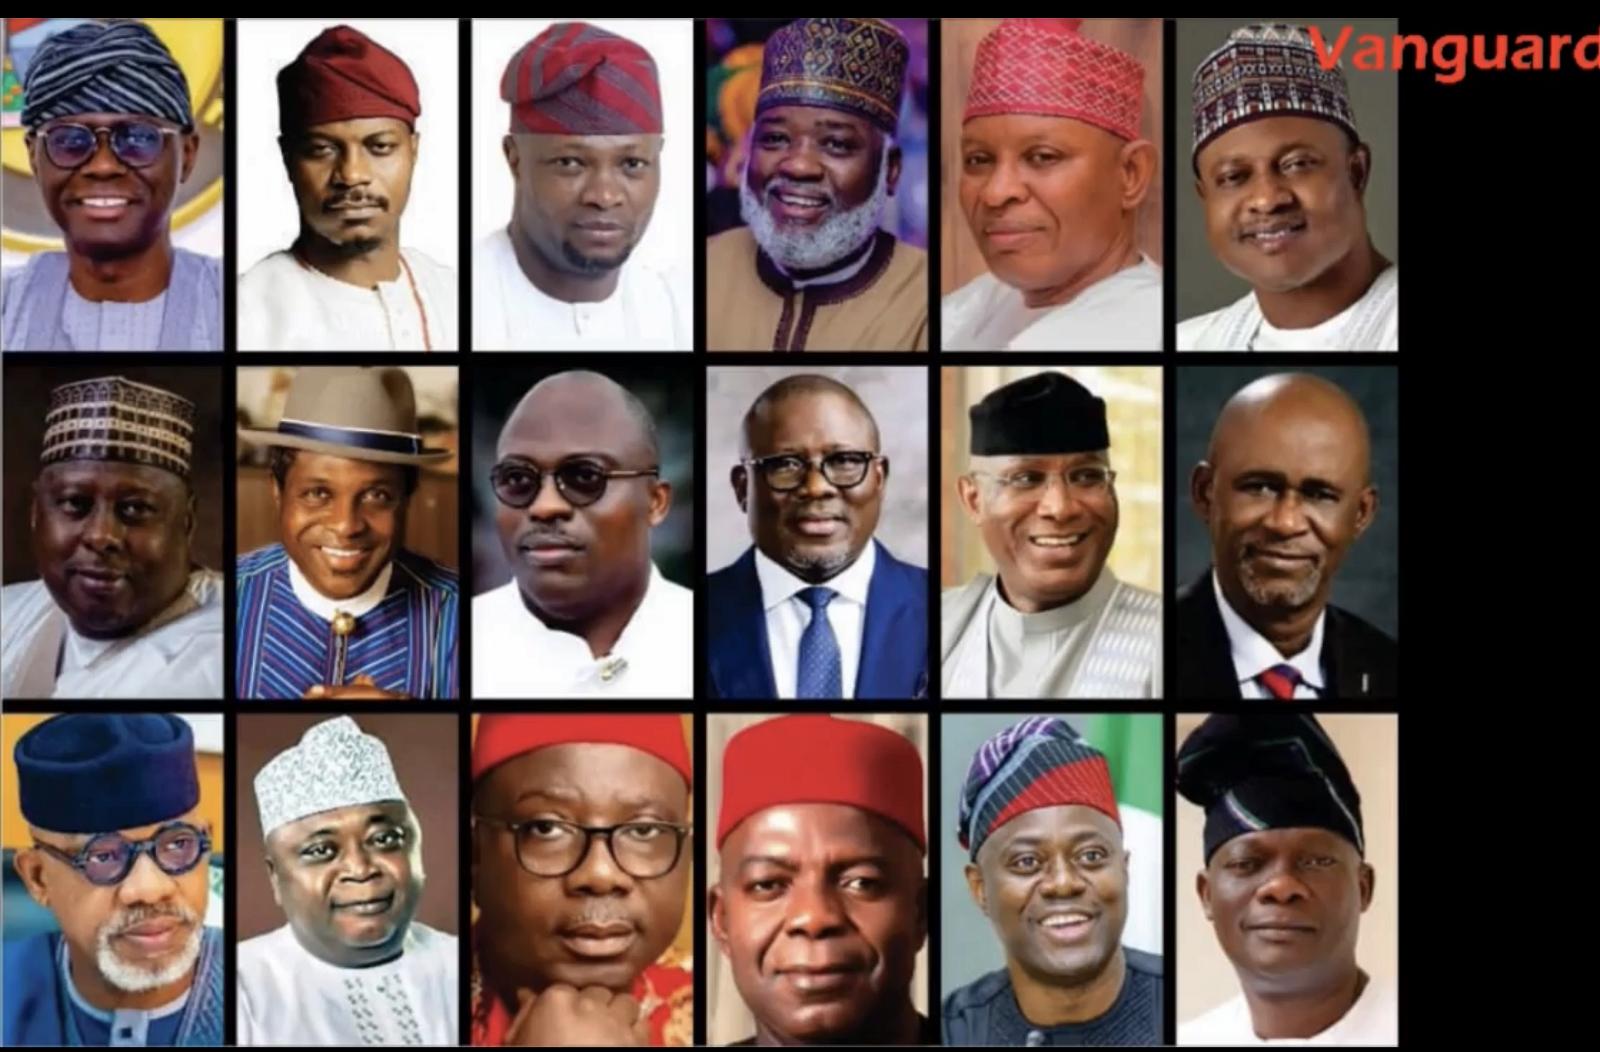 <a href="https://web.facebook.com/watch/hashtag/2023governorshipelection?__eep__=6%2F&__tn__=*NK-R">#2023GovernorshipElection</a> Review: ‘Most unusual process, even with Electoral Act, INEC’s promises